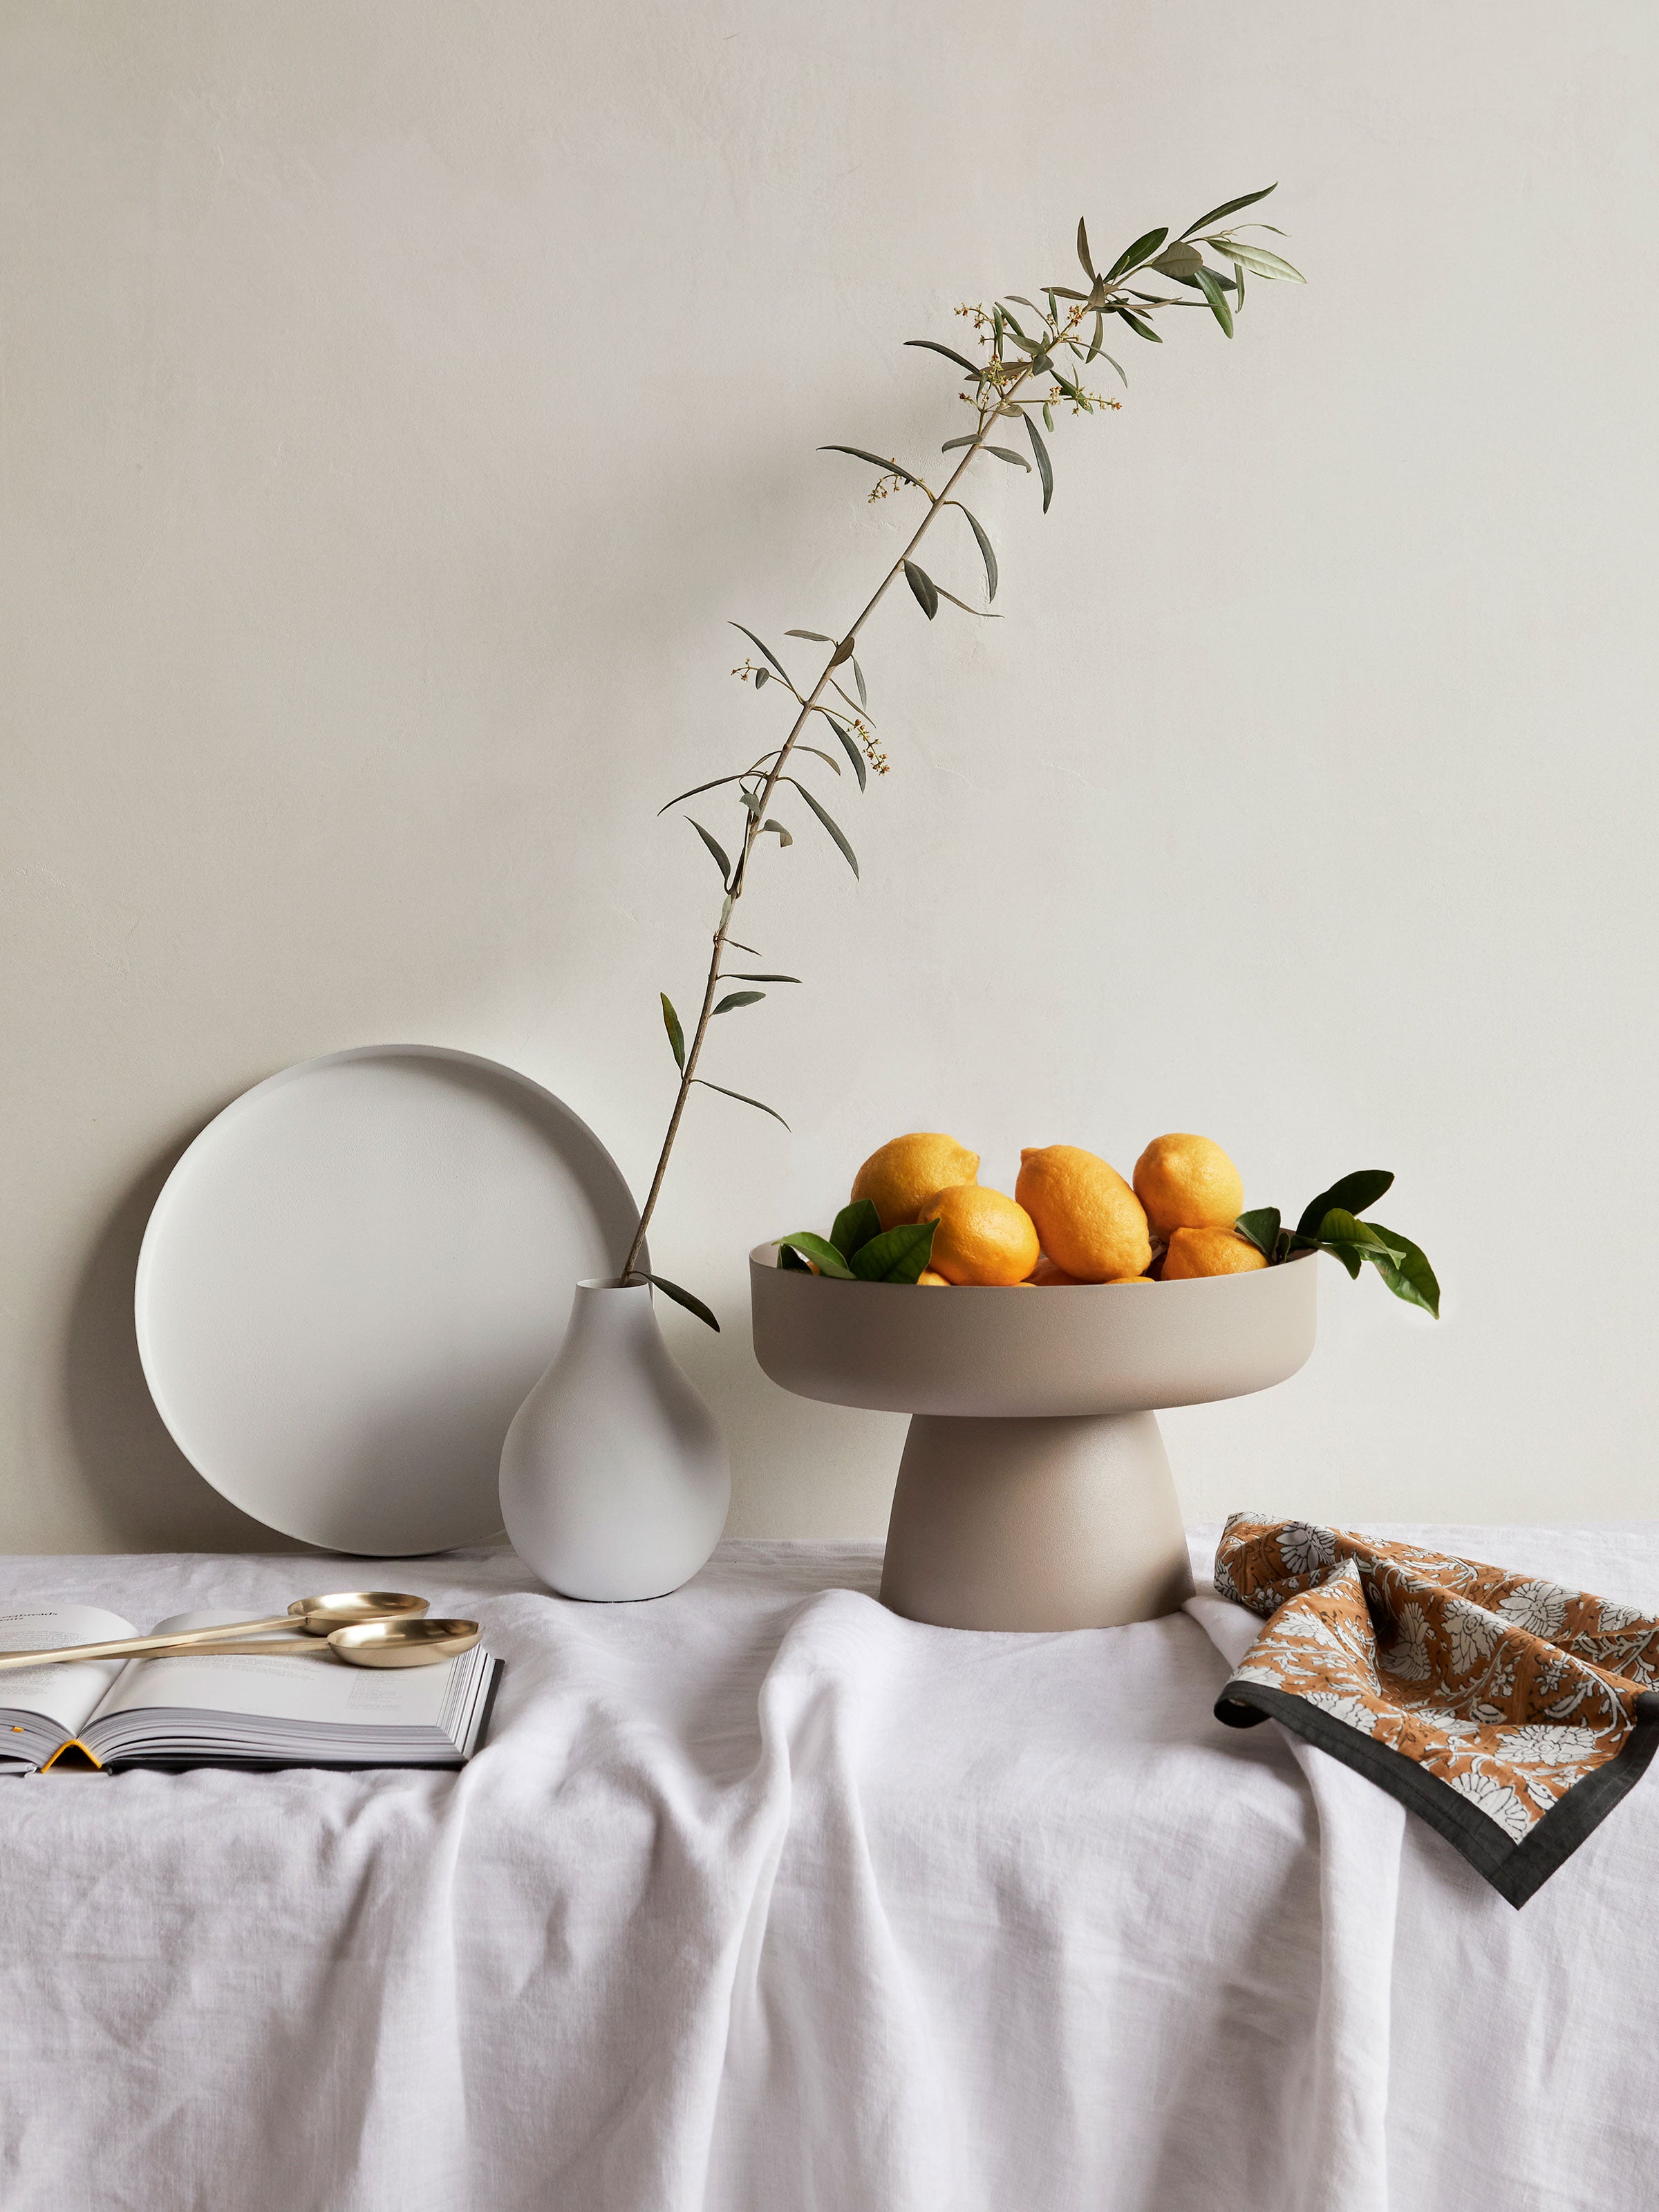 Moss White French Linen Table Cloth